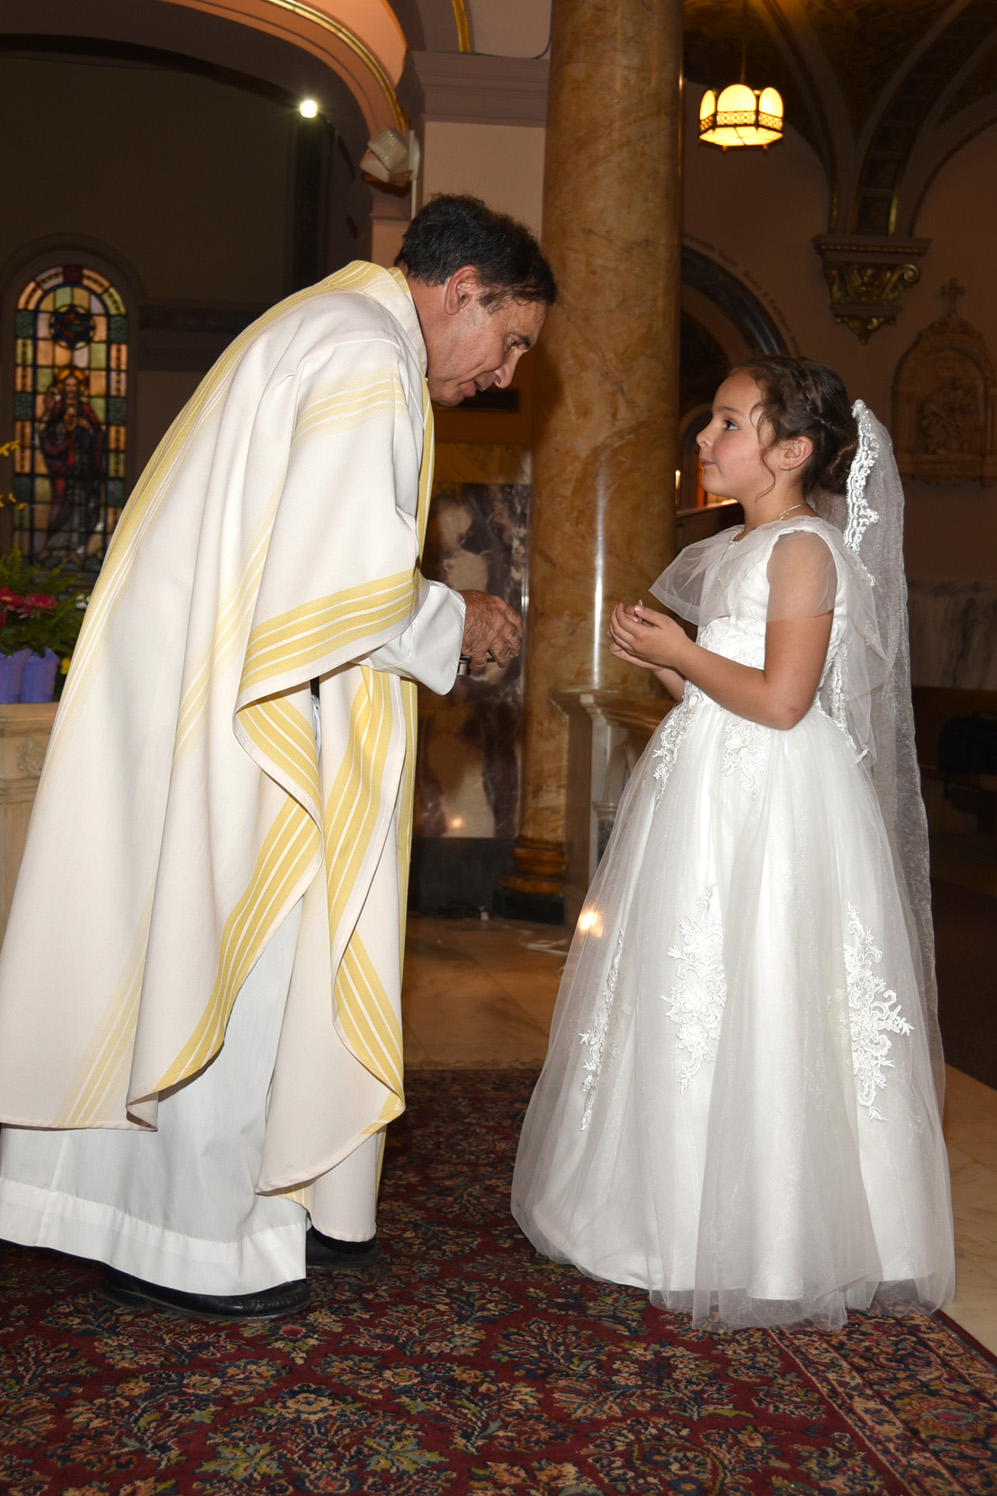 FIRST-COMMUNION-MAY-2-2021-1001001259